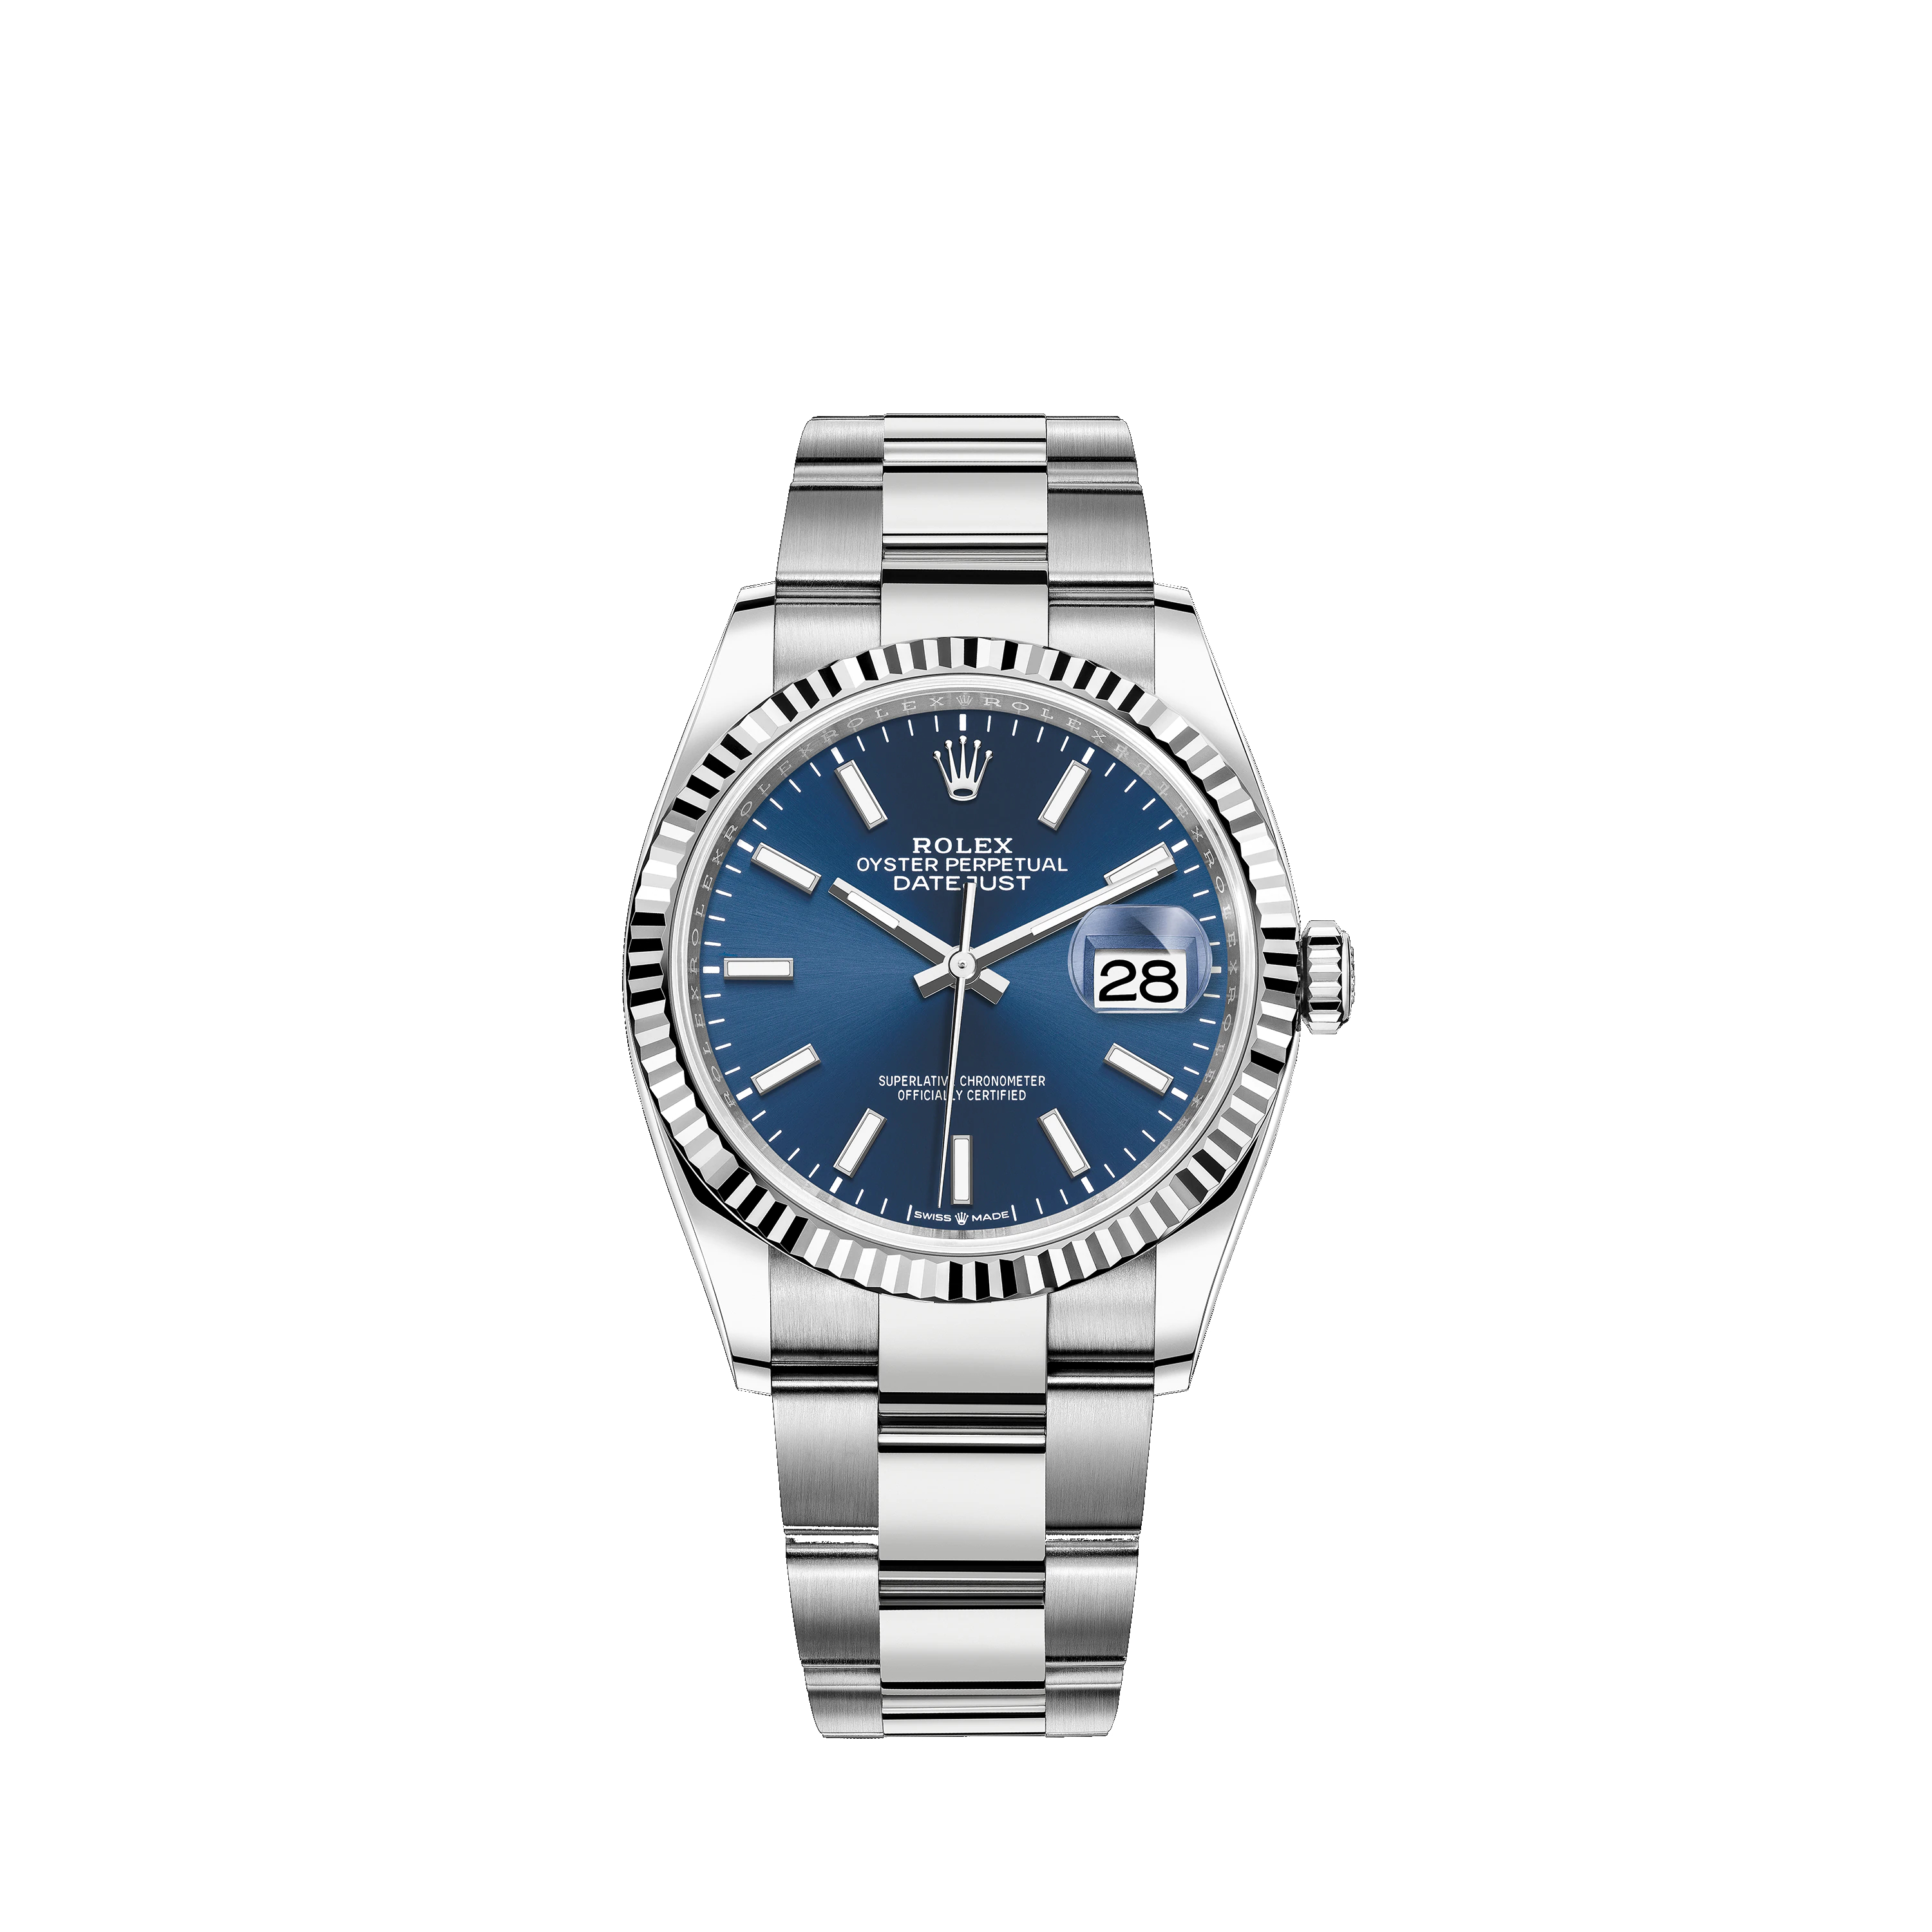 Datejust 36 126234 White Gold & Stainless Steel Watch (Blue)